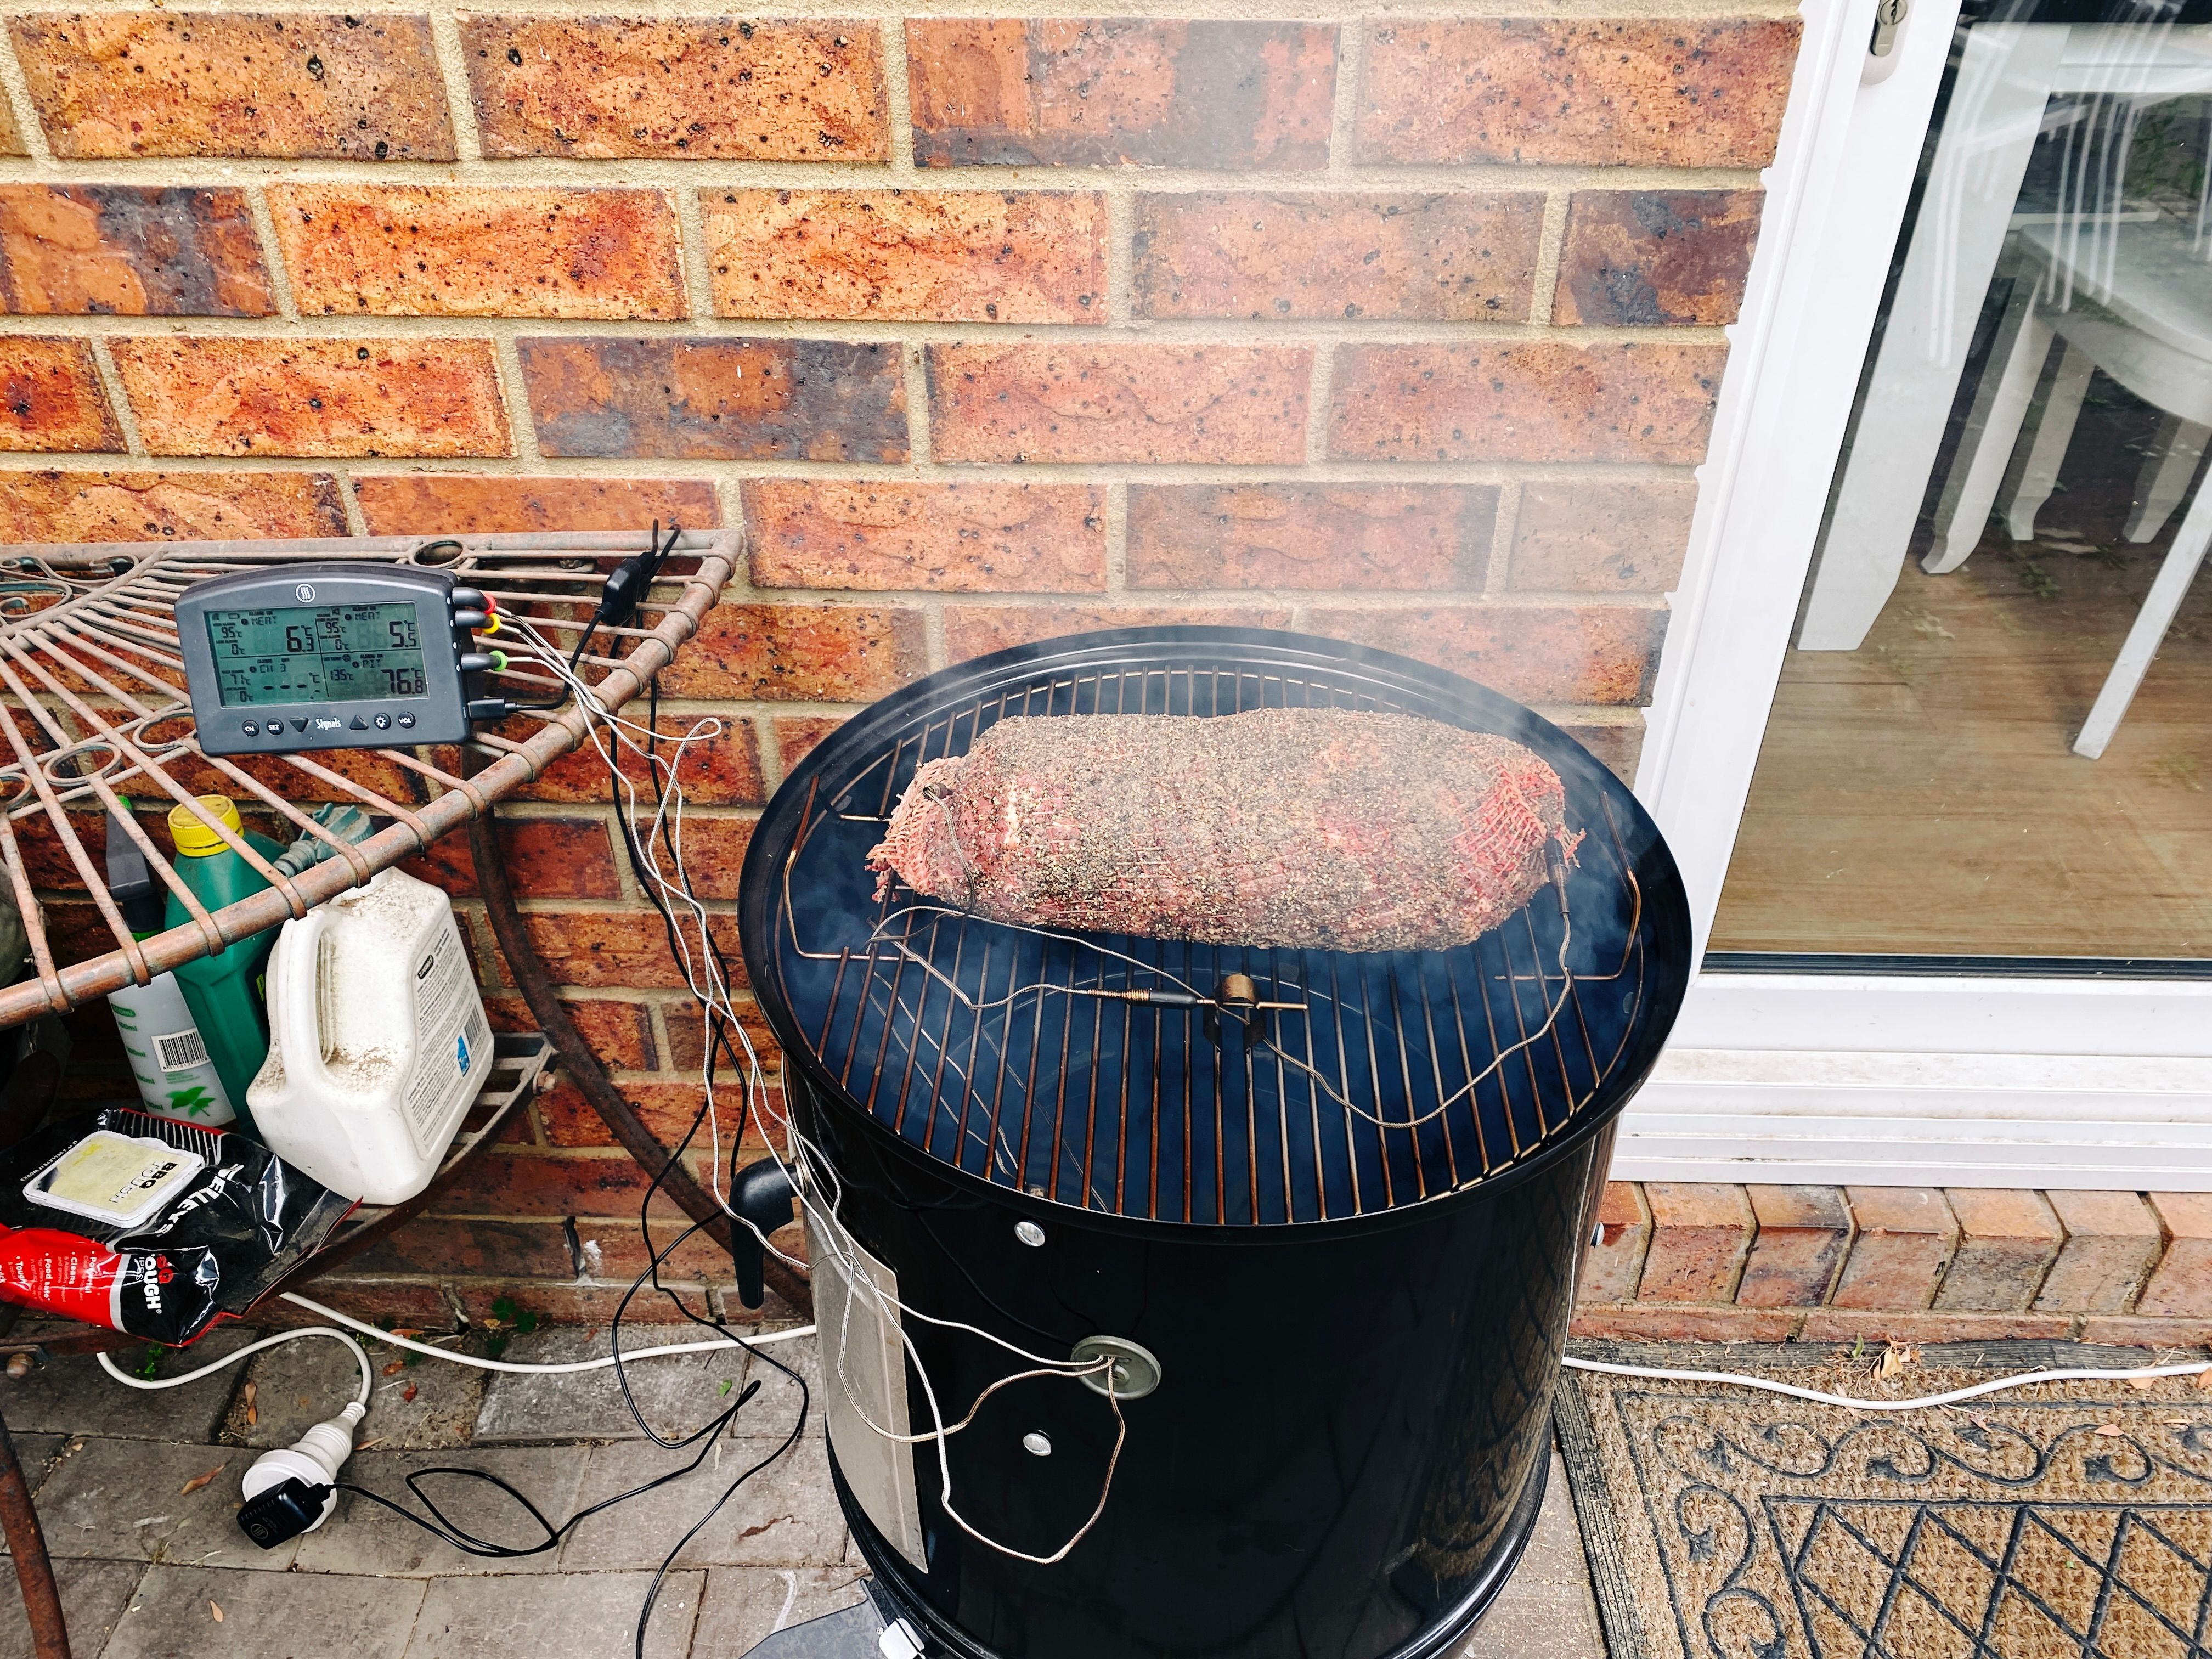 A photo of a raw 3kg pork collar butt wrapped in netting and covered in coarse pepper and salt, sitting on the grille of a smoker. There's two temperature probes going into the meat and a third measuring the ambient temperature of the smoker itself, all three of which are going into a little box with an LCD (a Thermoworks "Signals") that shows the temperature of each probe. The wood has started smoking already and there's lots of it coming up from underneath the grille.